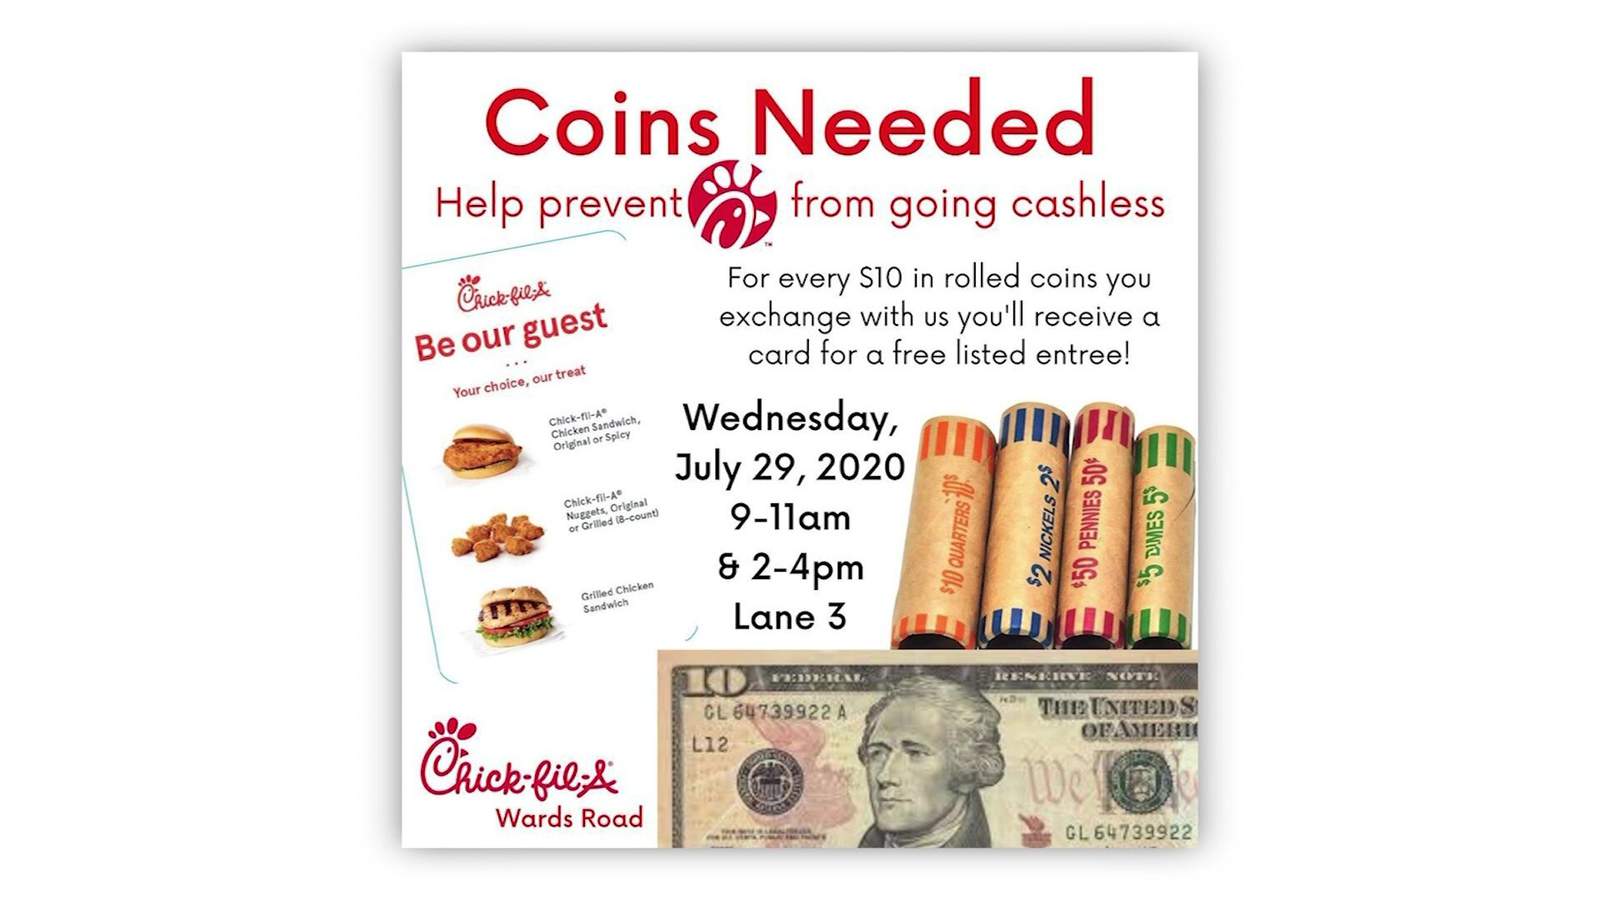 Exchange coins for cash, get a free Chick-fil-A entree in Lynchburg